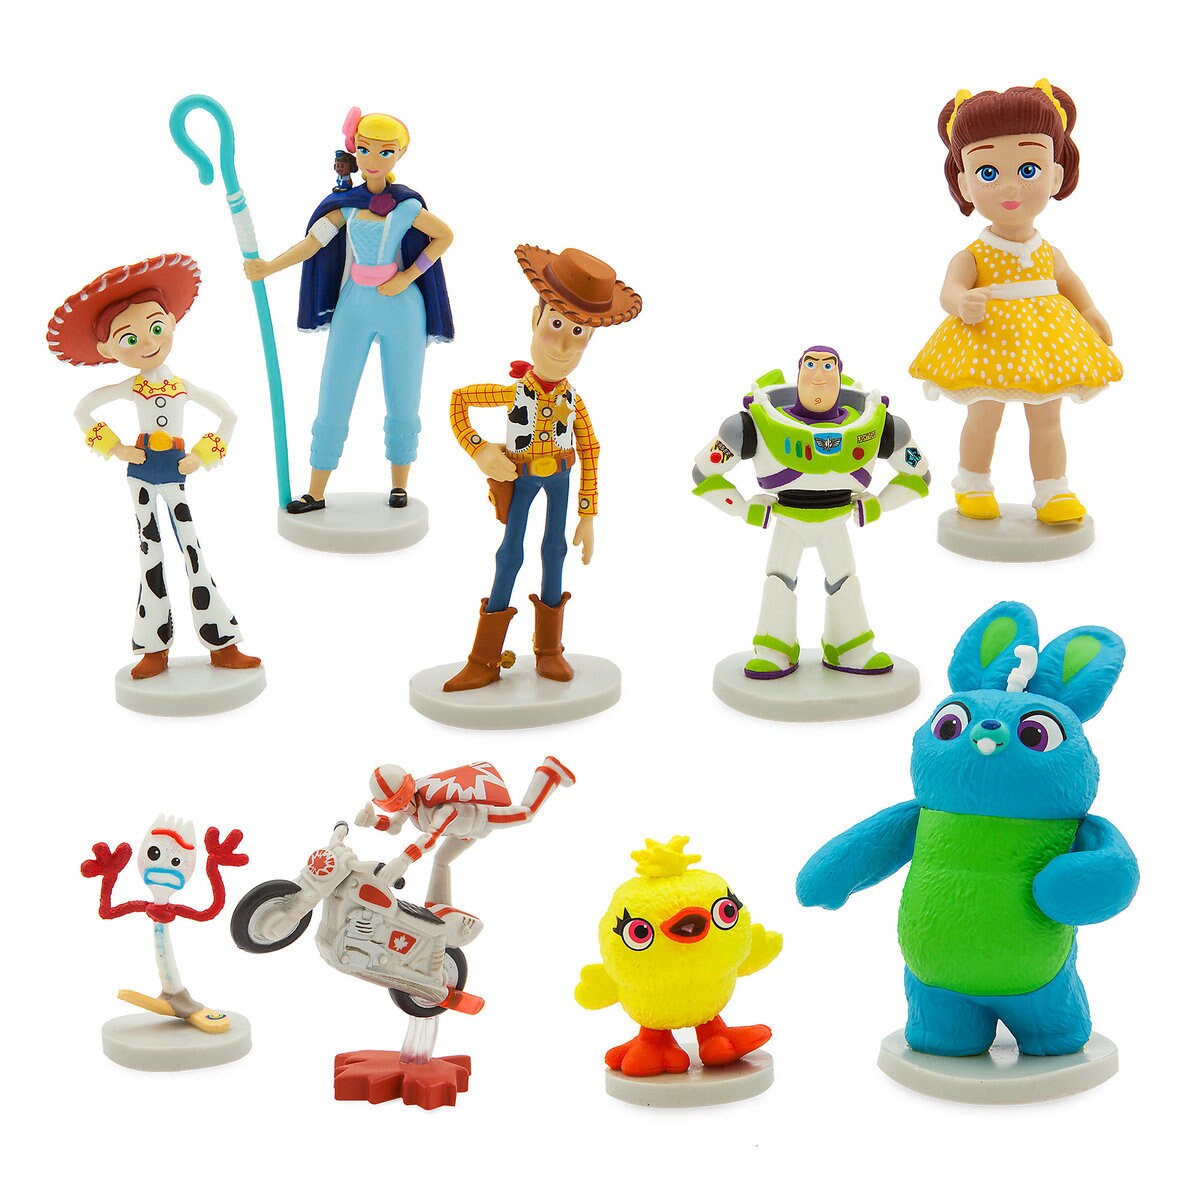 Product Image of Toy Story 4 Deluxe Figure Set # 1